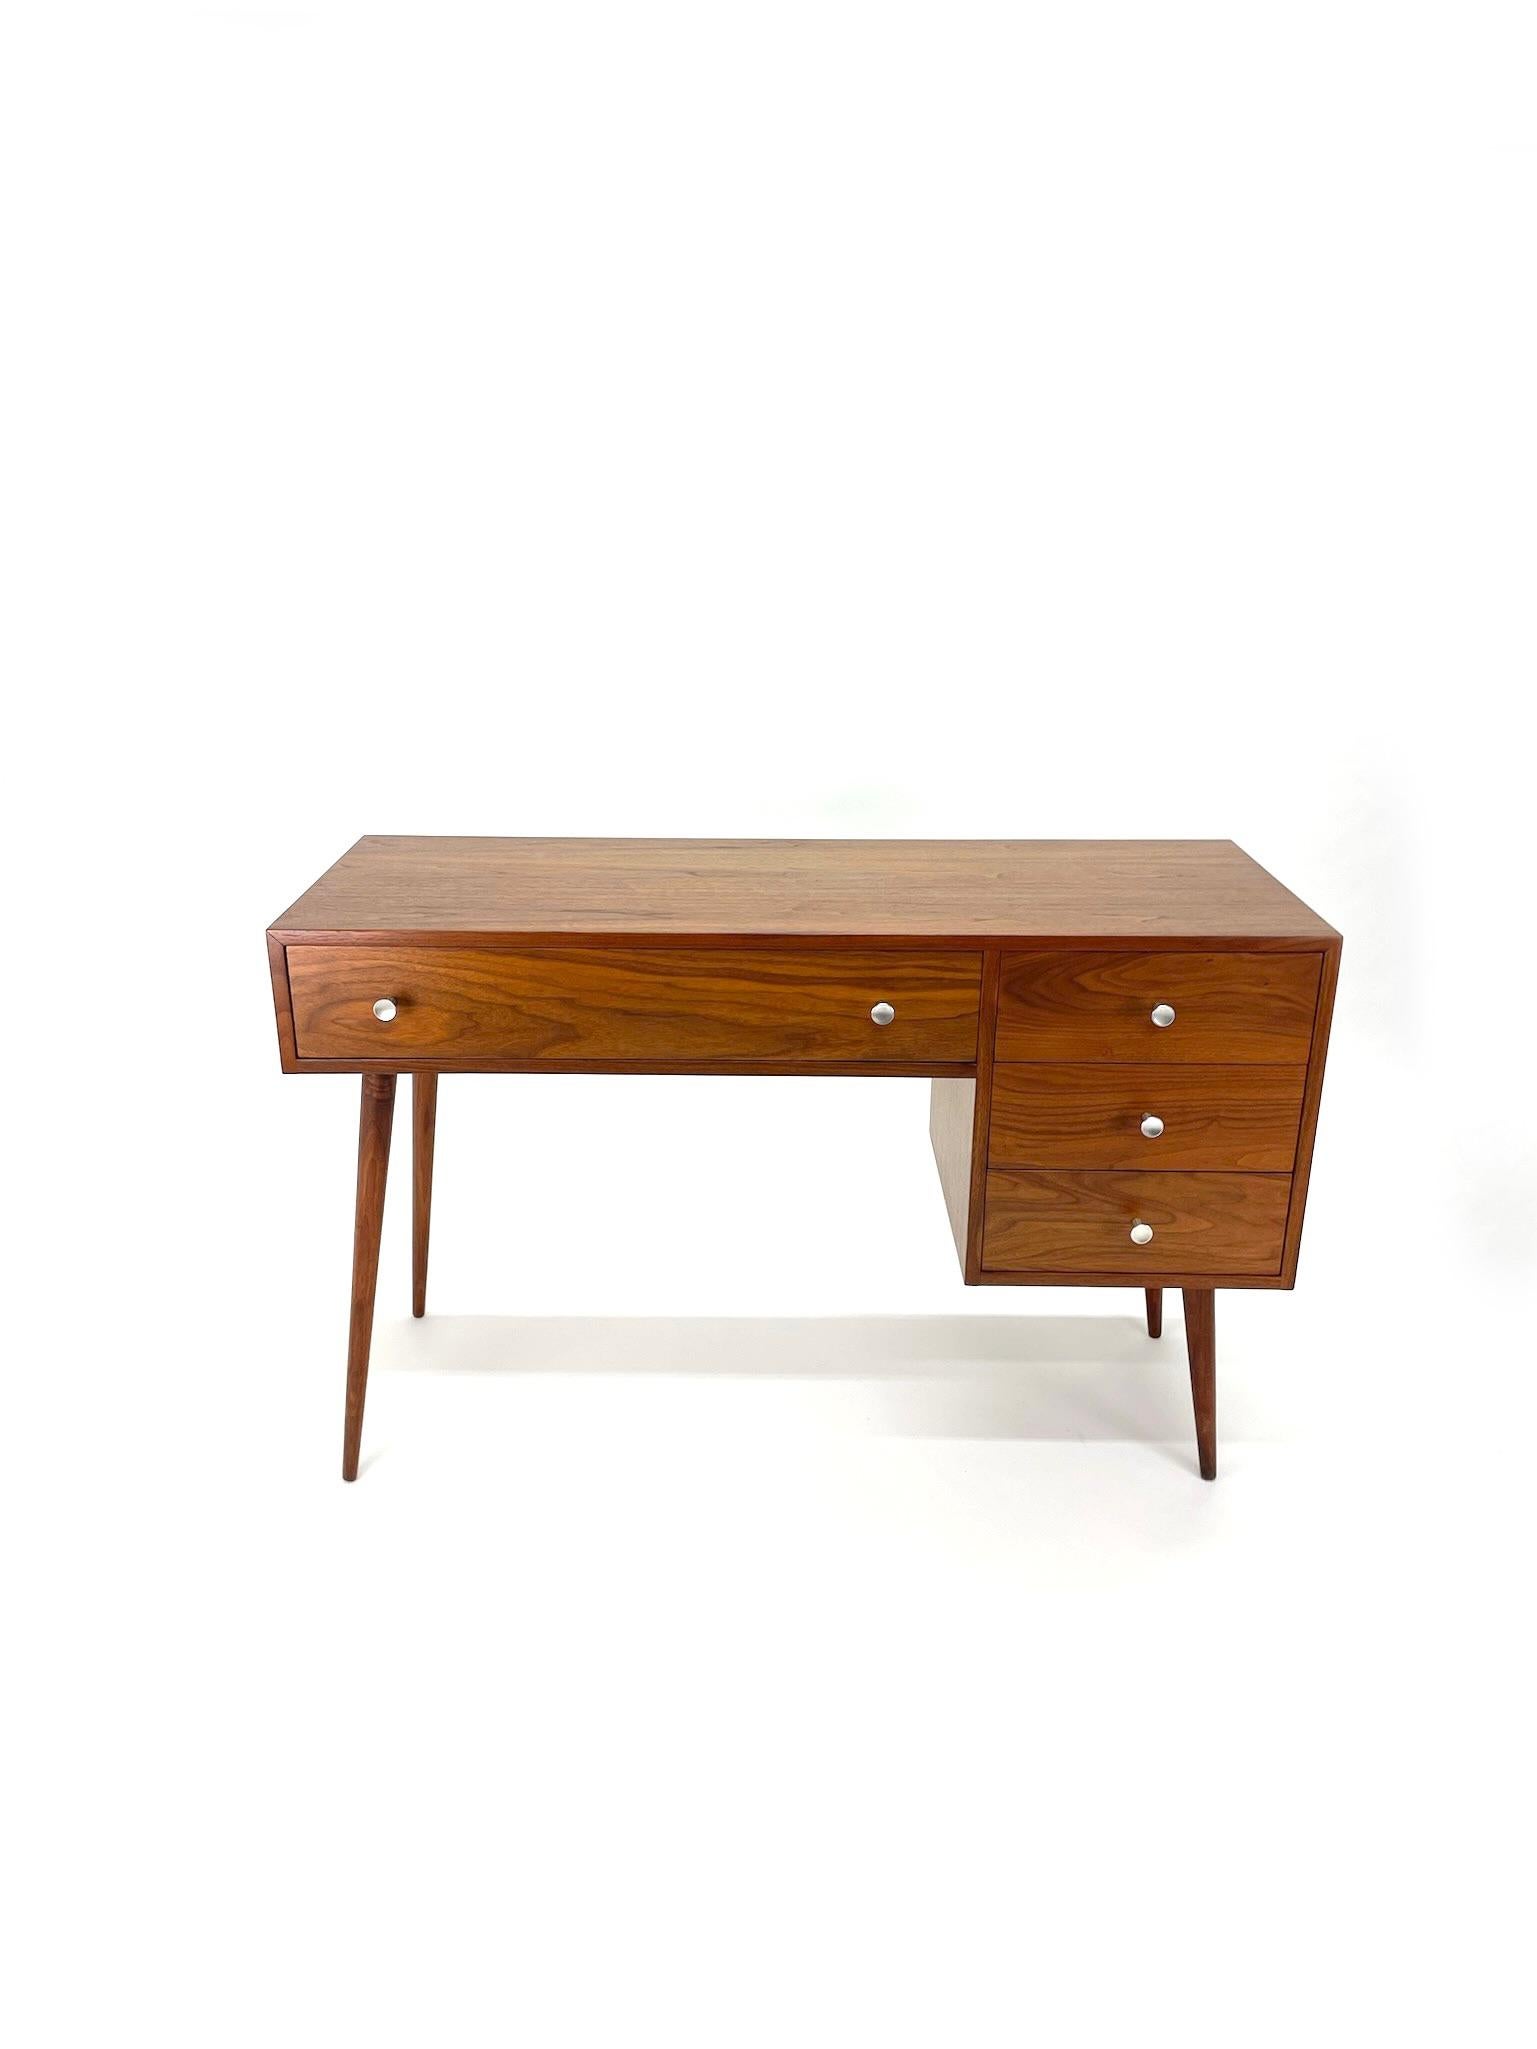 Beautifully restored walnut Glenn of California Desk by Kipp Stewart and Stewart Macdougall. Features four drawers with aluminum pulls. Perfect for a smaller office or bedroom. 

Condition: Has been restored to excellent vintage condition. All